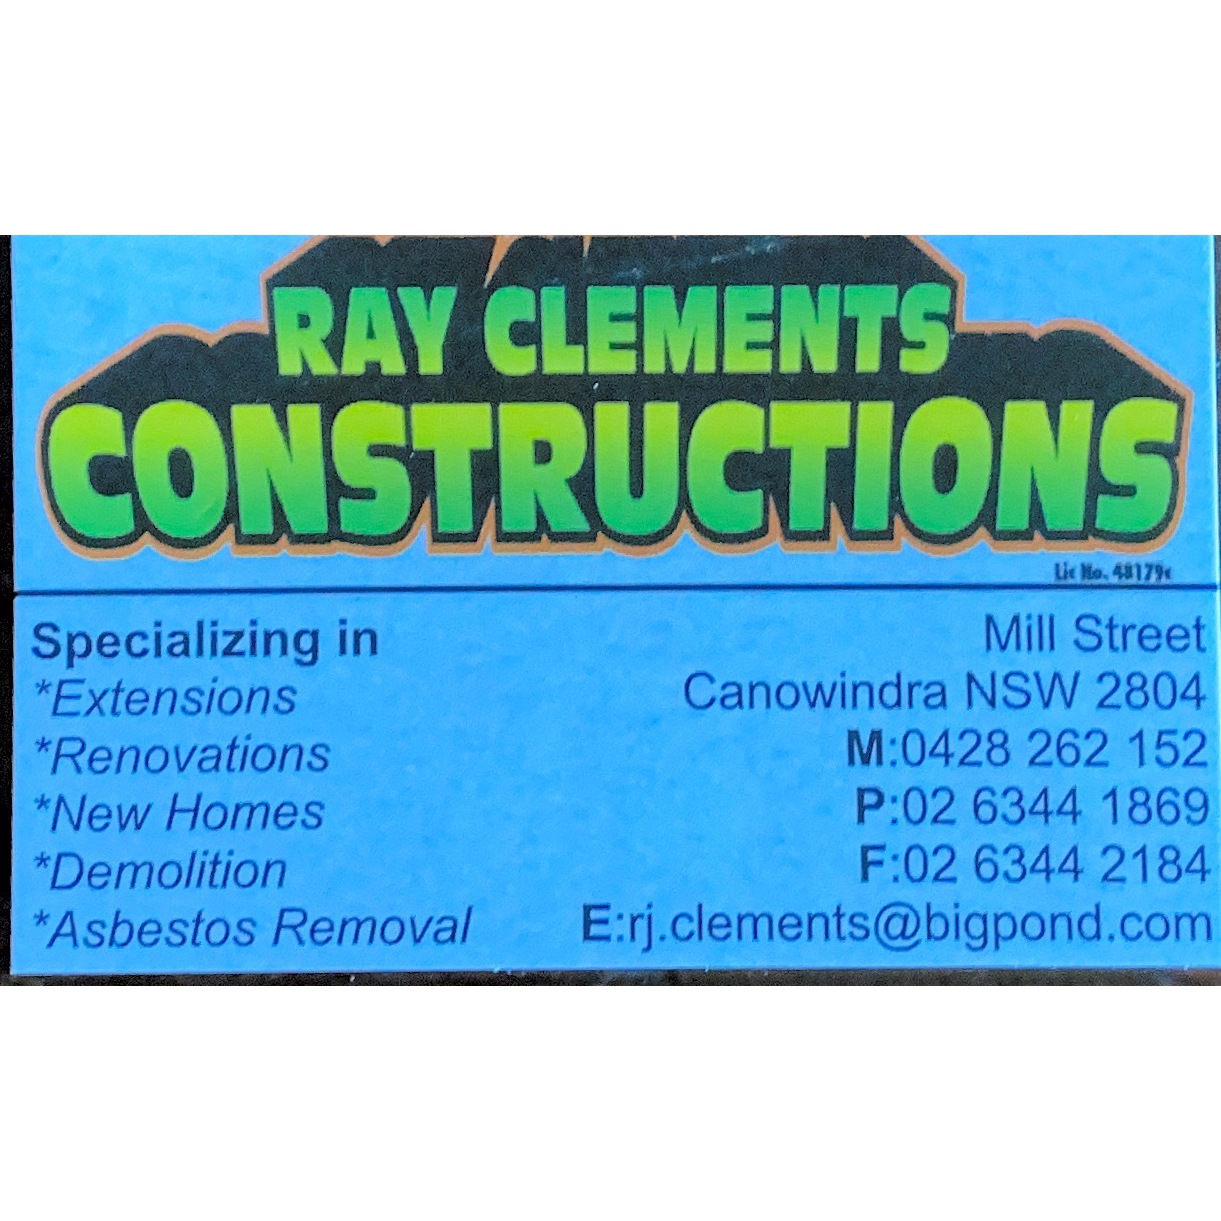 Clements Ray Constructions Logo